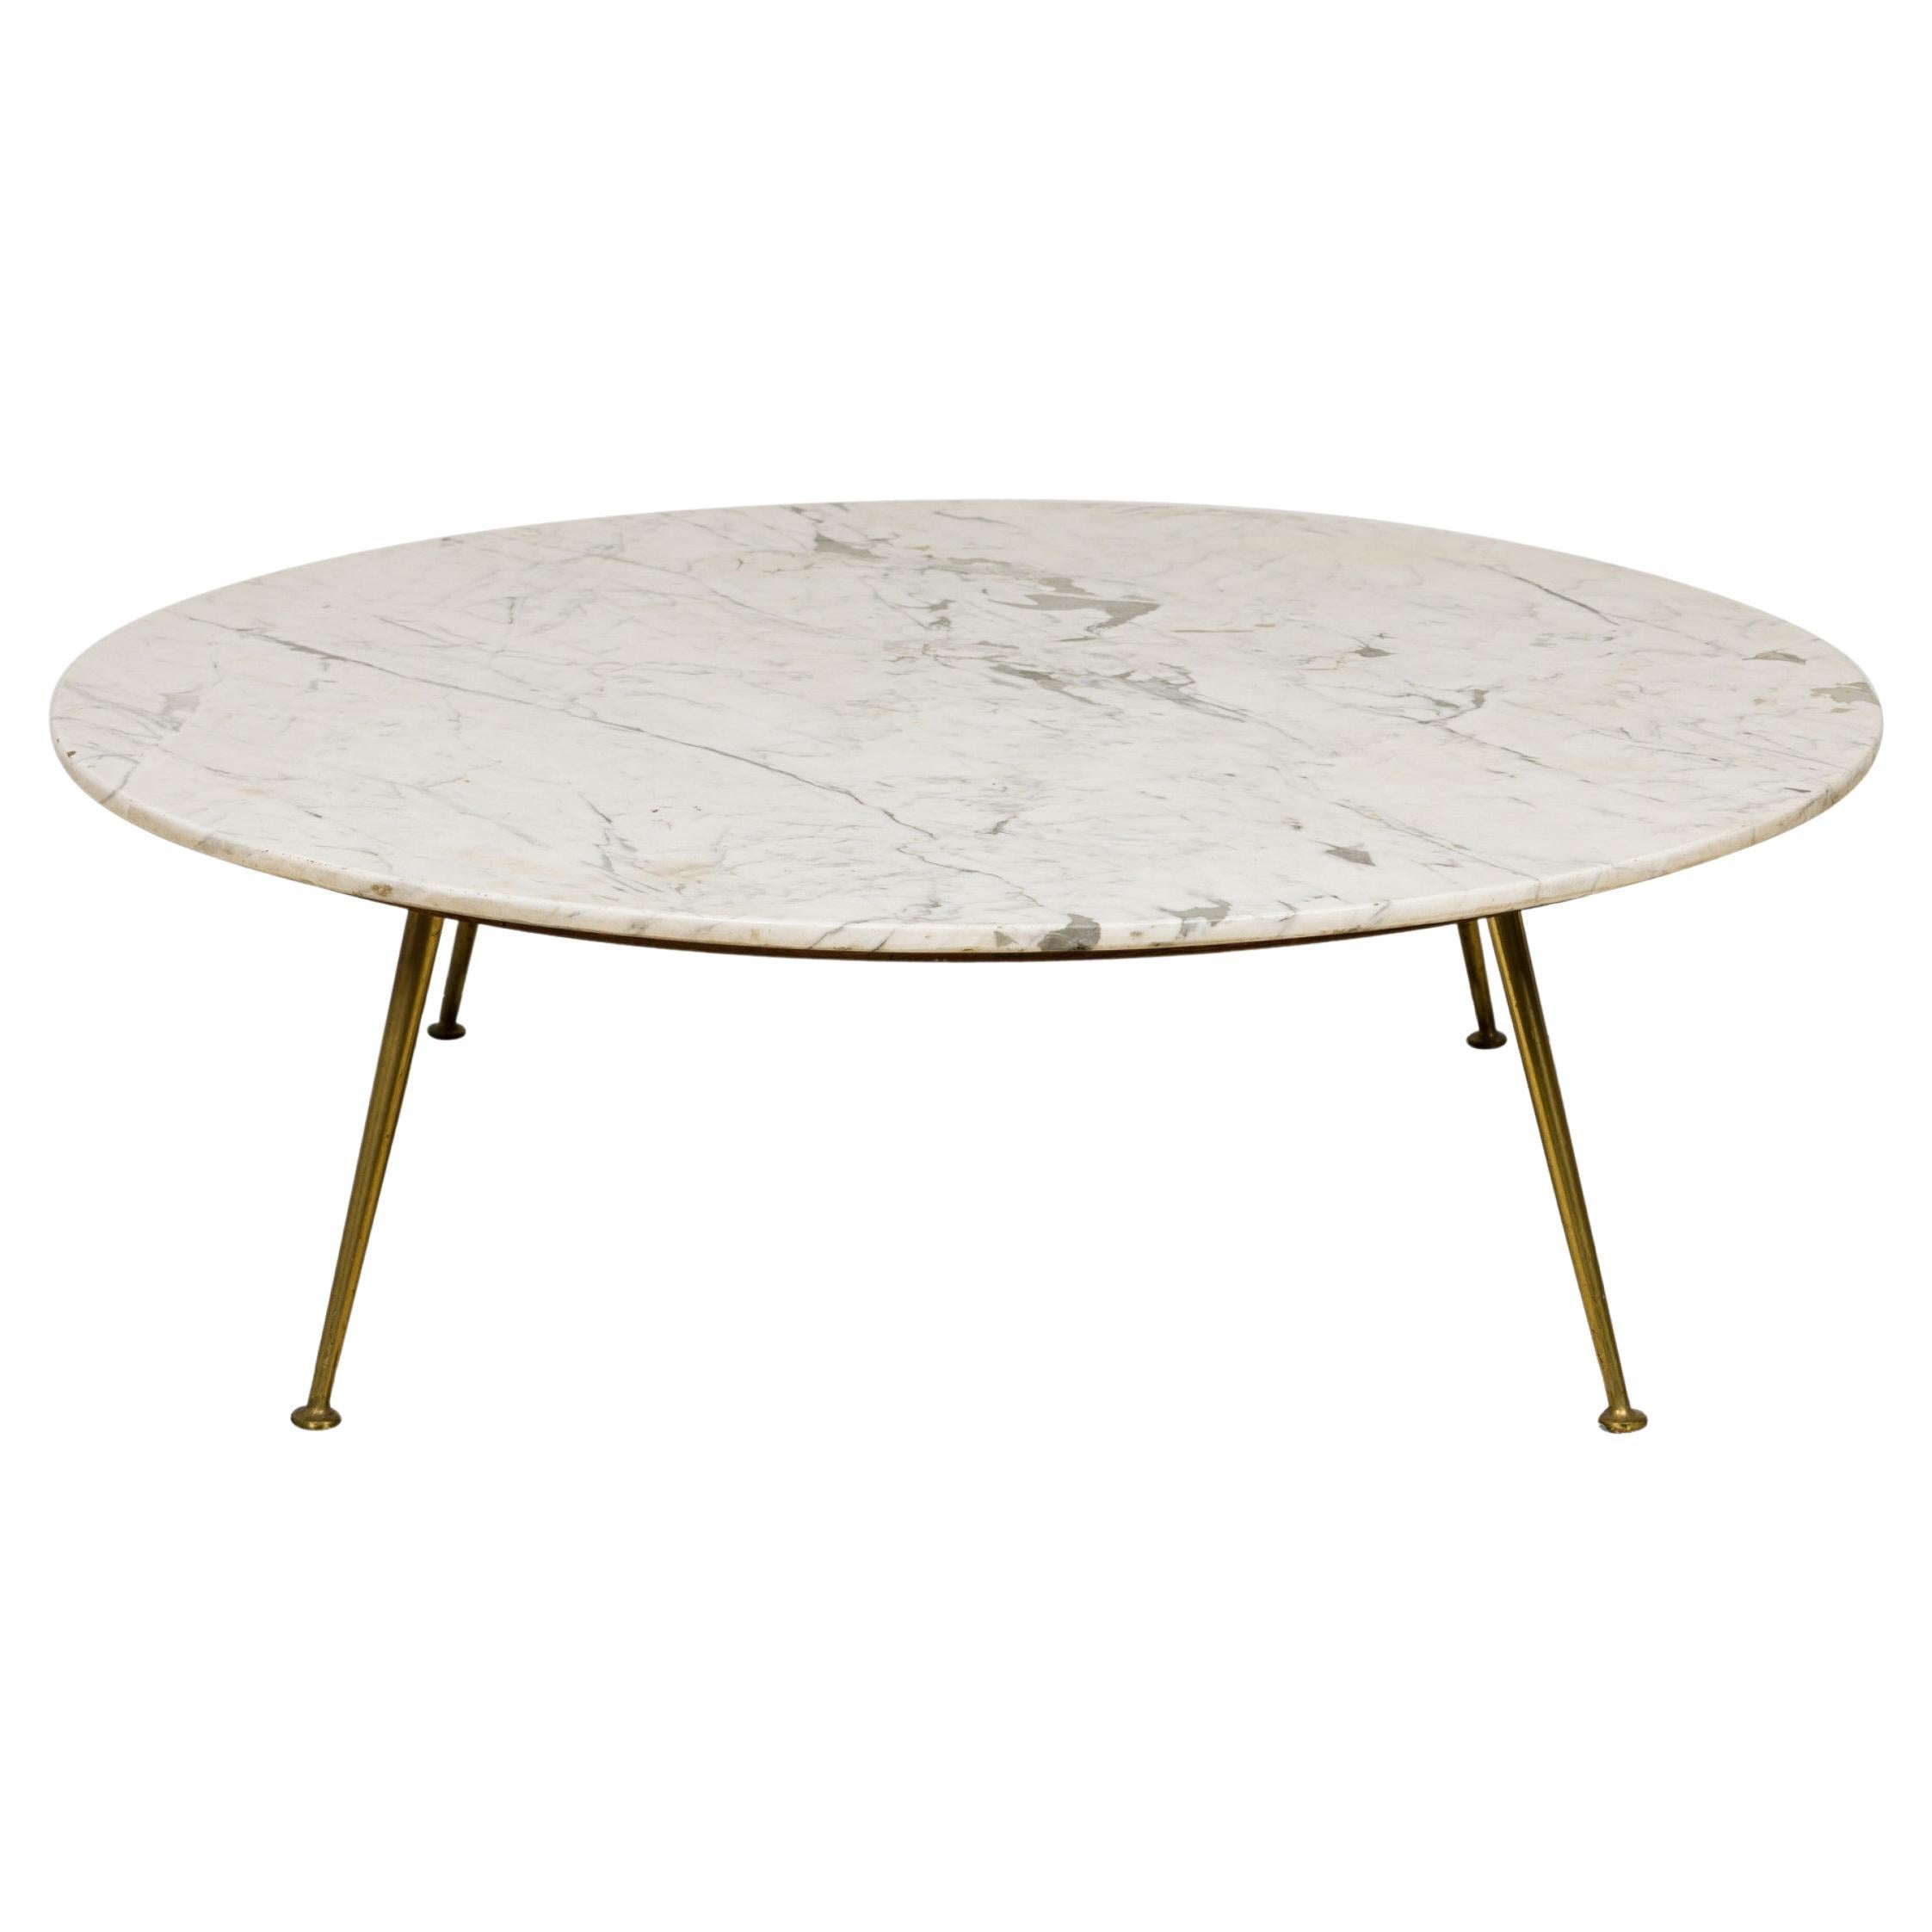 Italian Carrera Marble Round Coffee / Cocktail Table For Sale